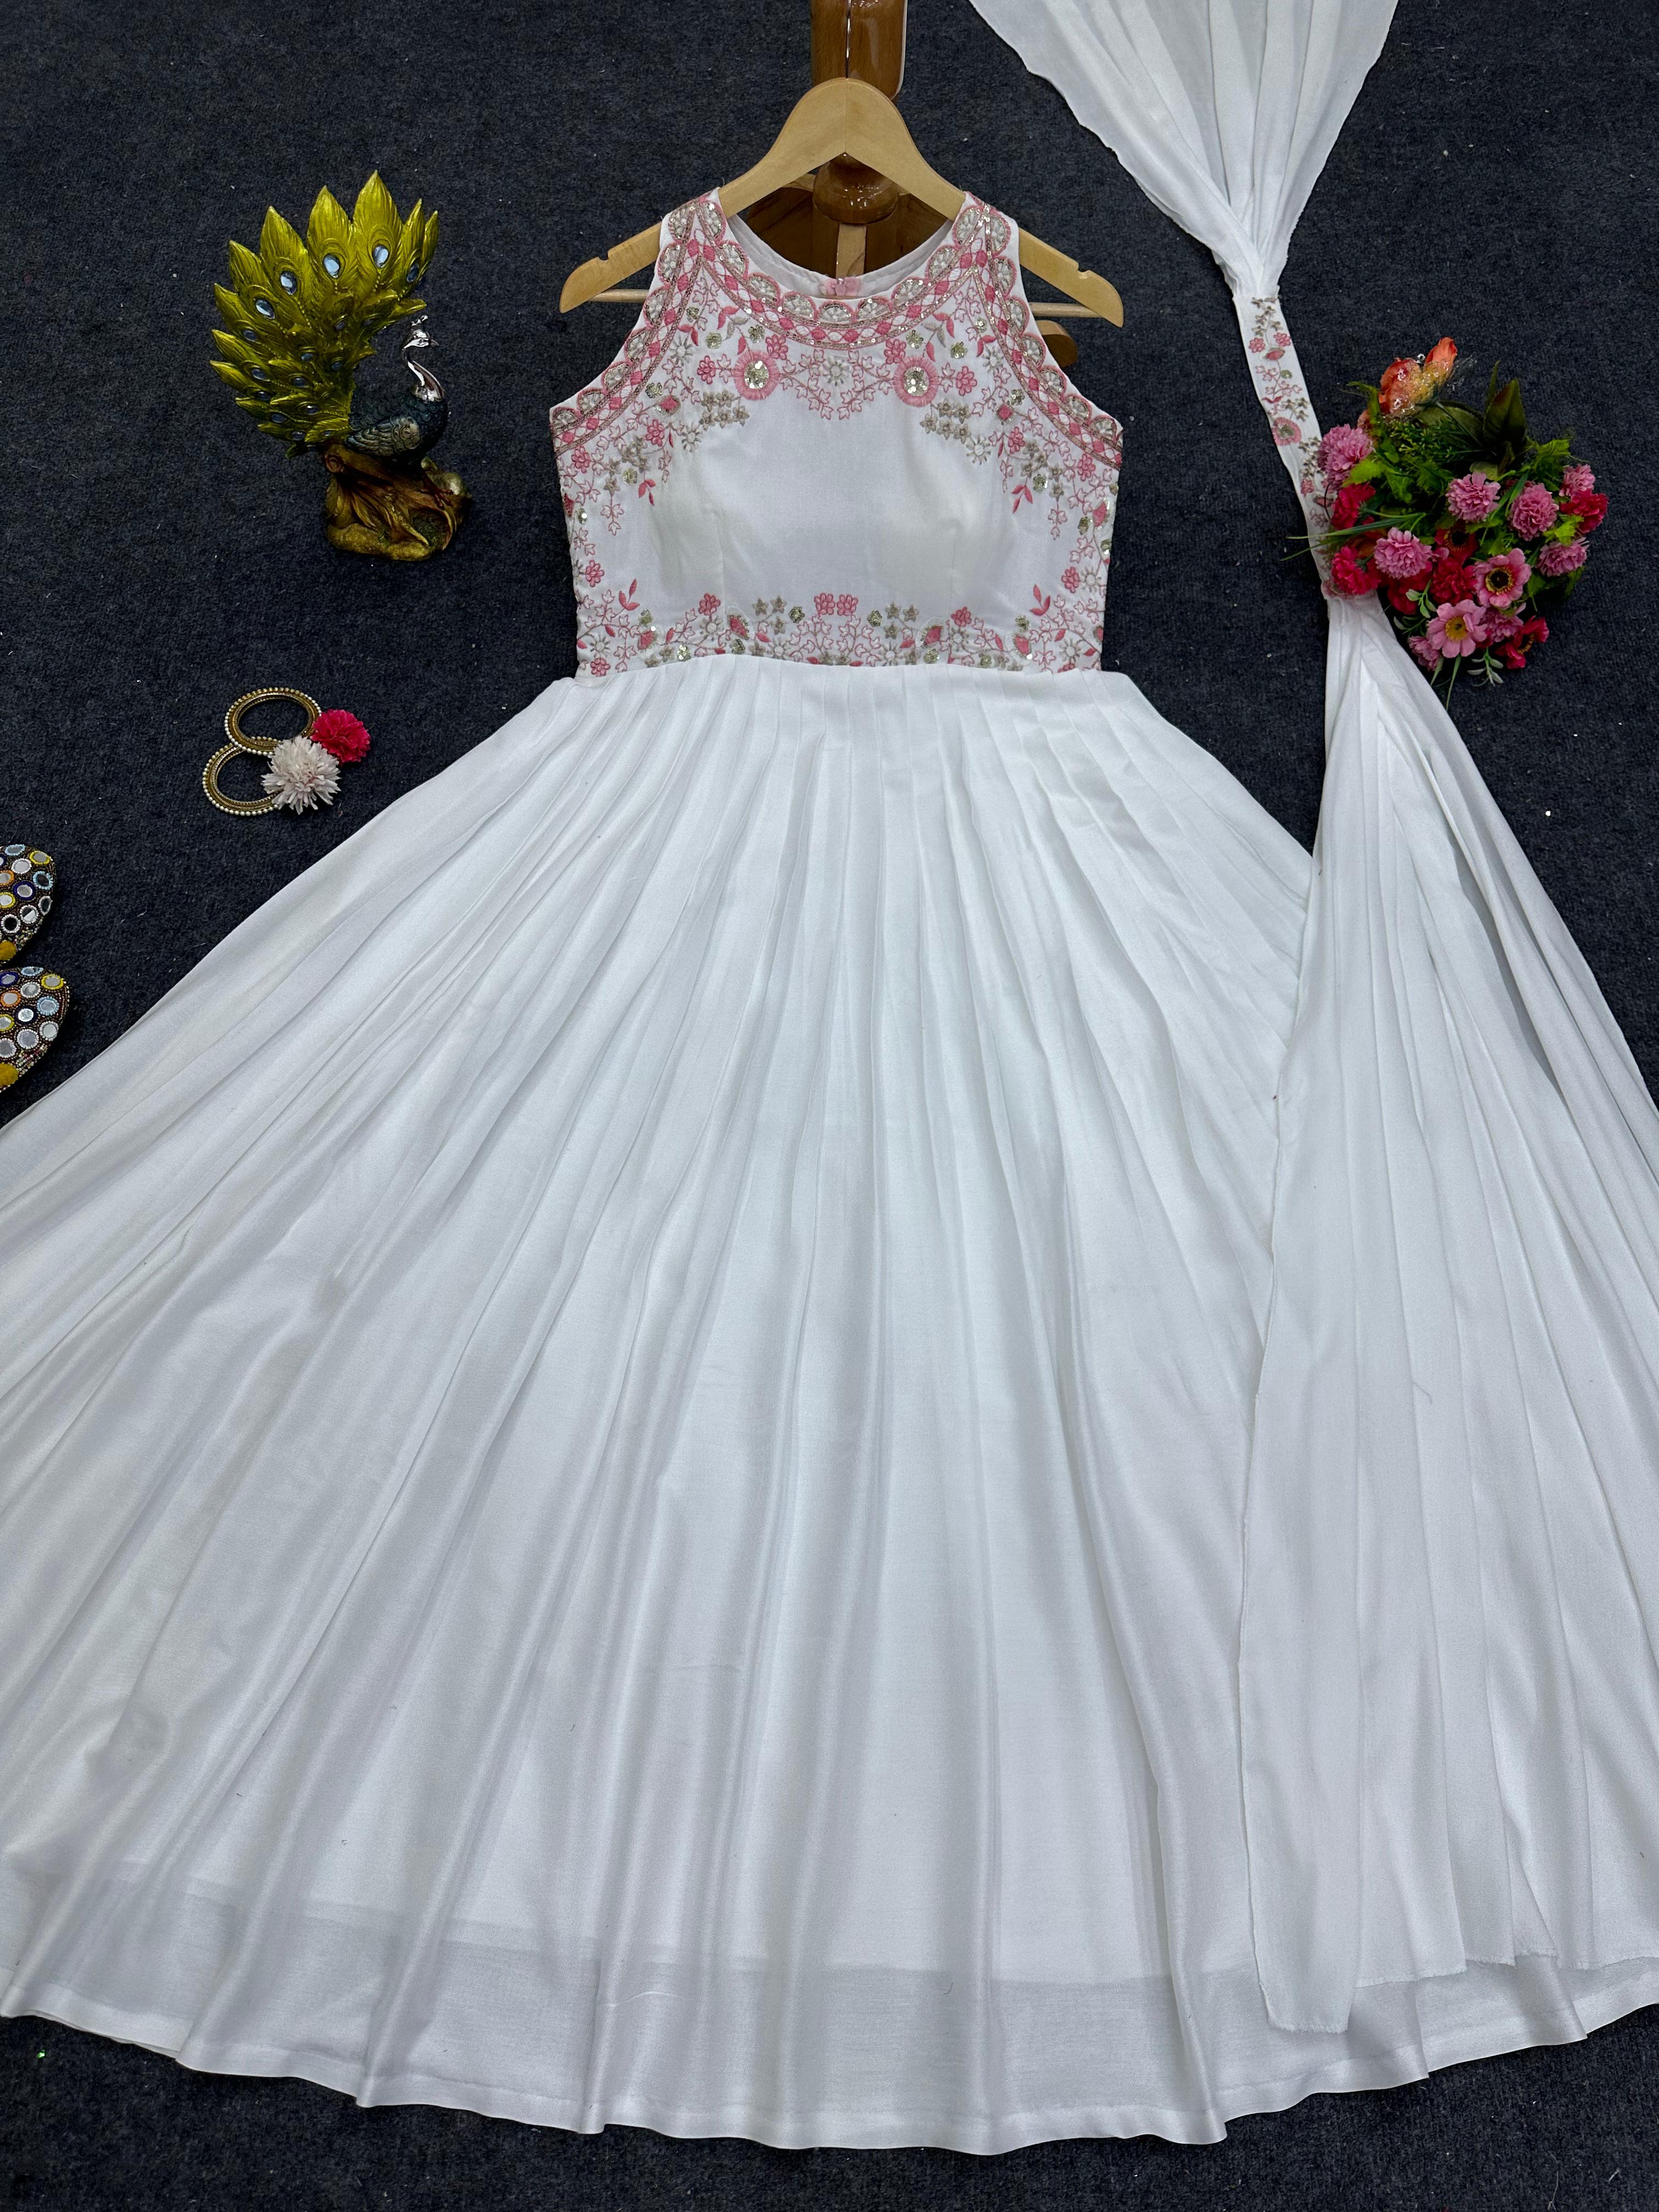 Outstanding Thread Work White Color Gown